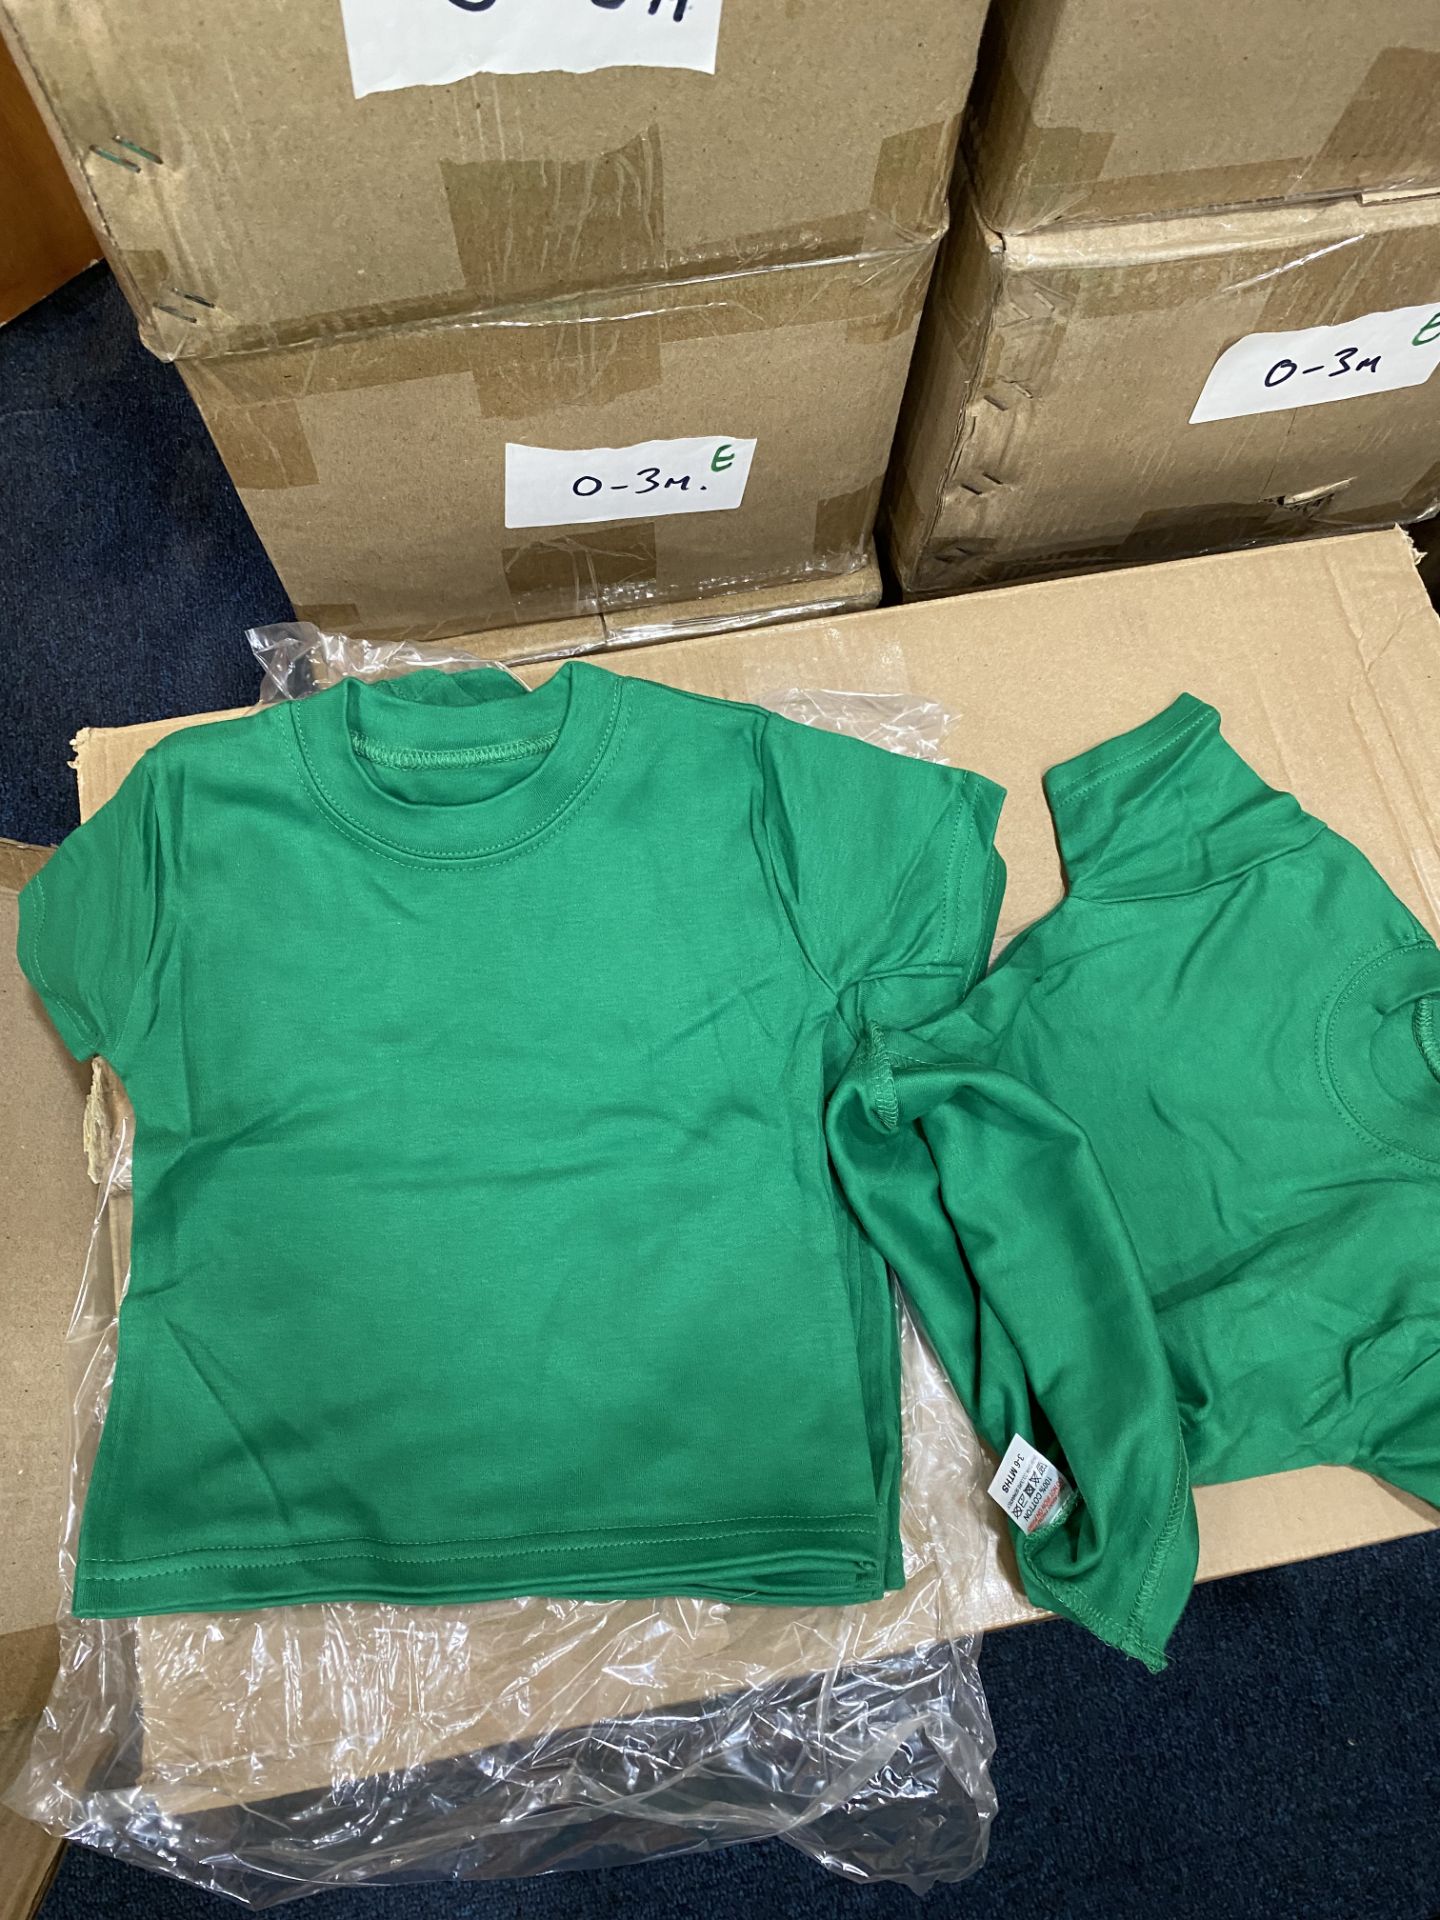 X50 GREEN BABY TSHIRTS - 6-12 MONTHS - 100% COTTON - RRP £200